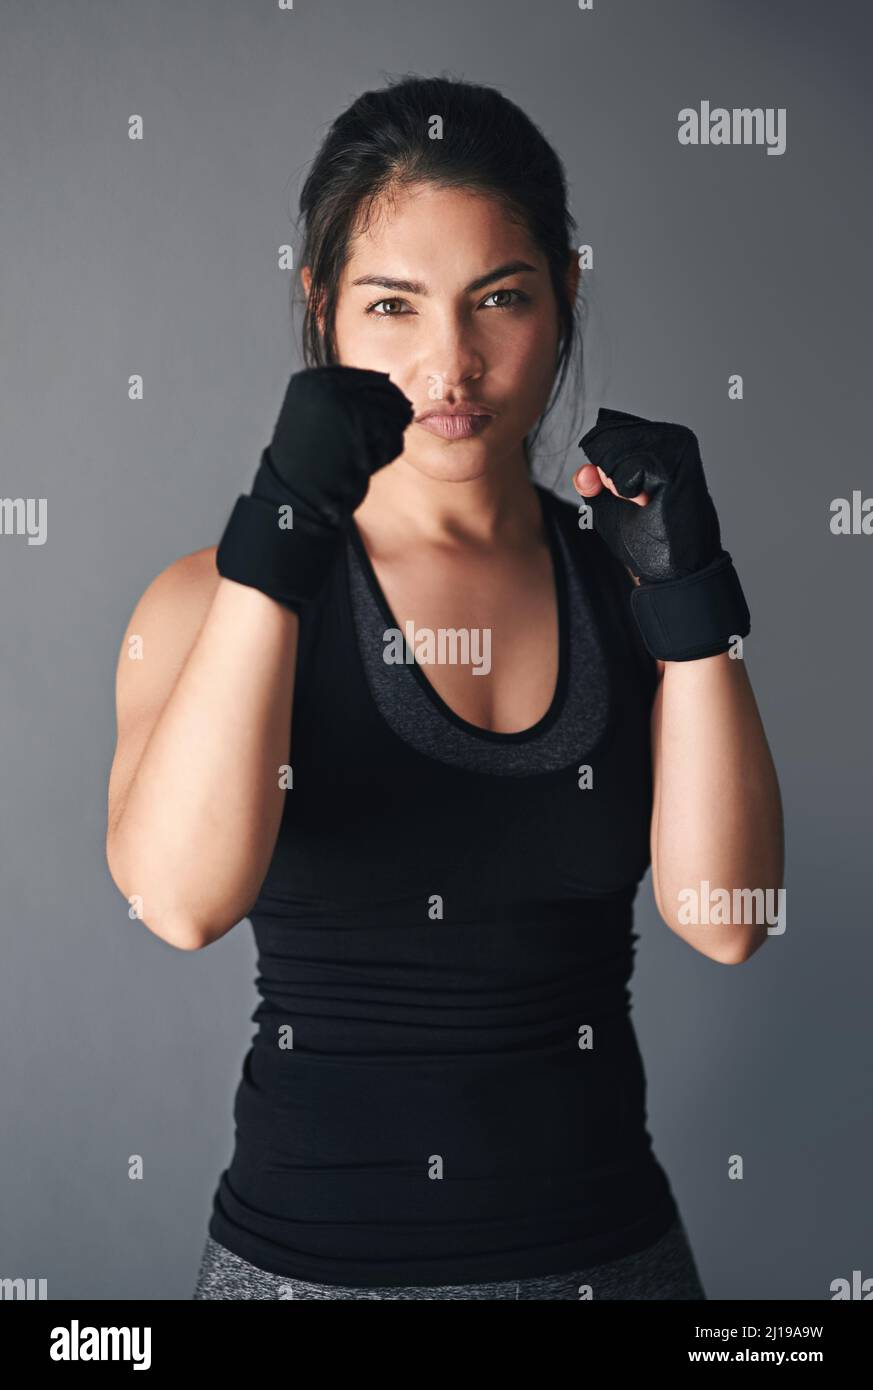 Ready for a fight. Studio shot of a female kickboxer against a gray background. Stock Photo